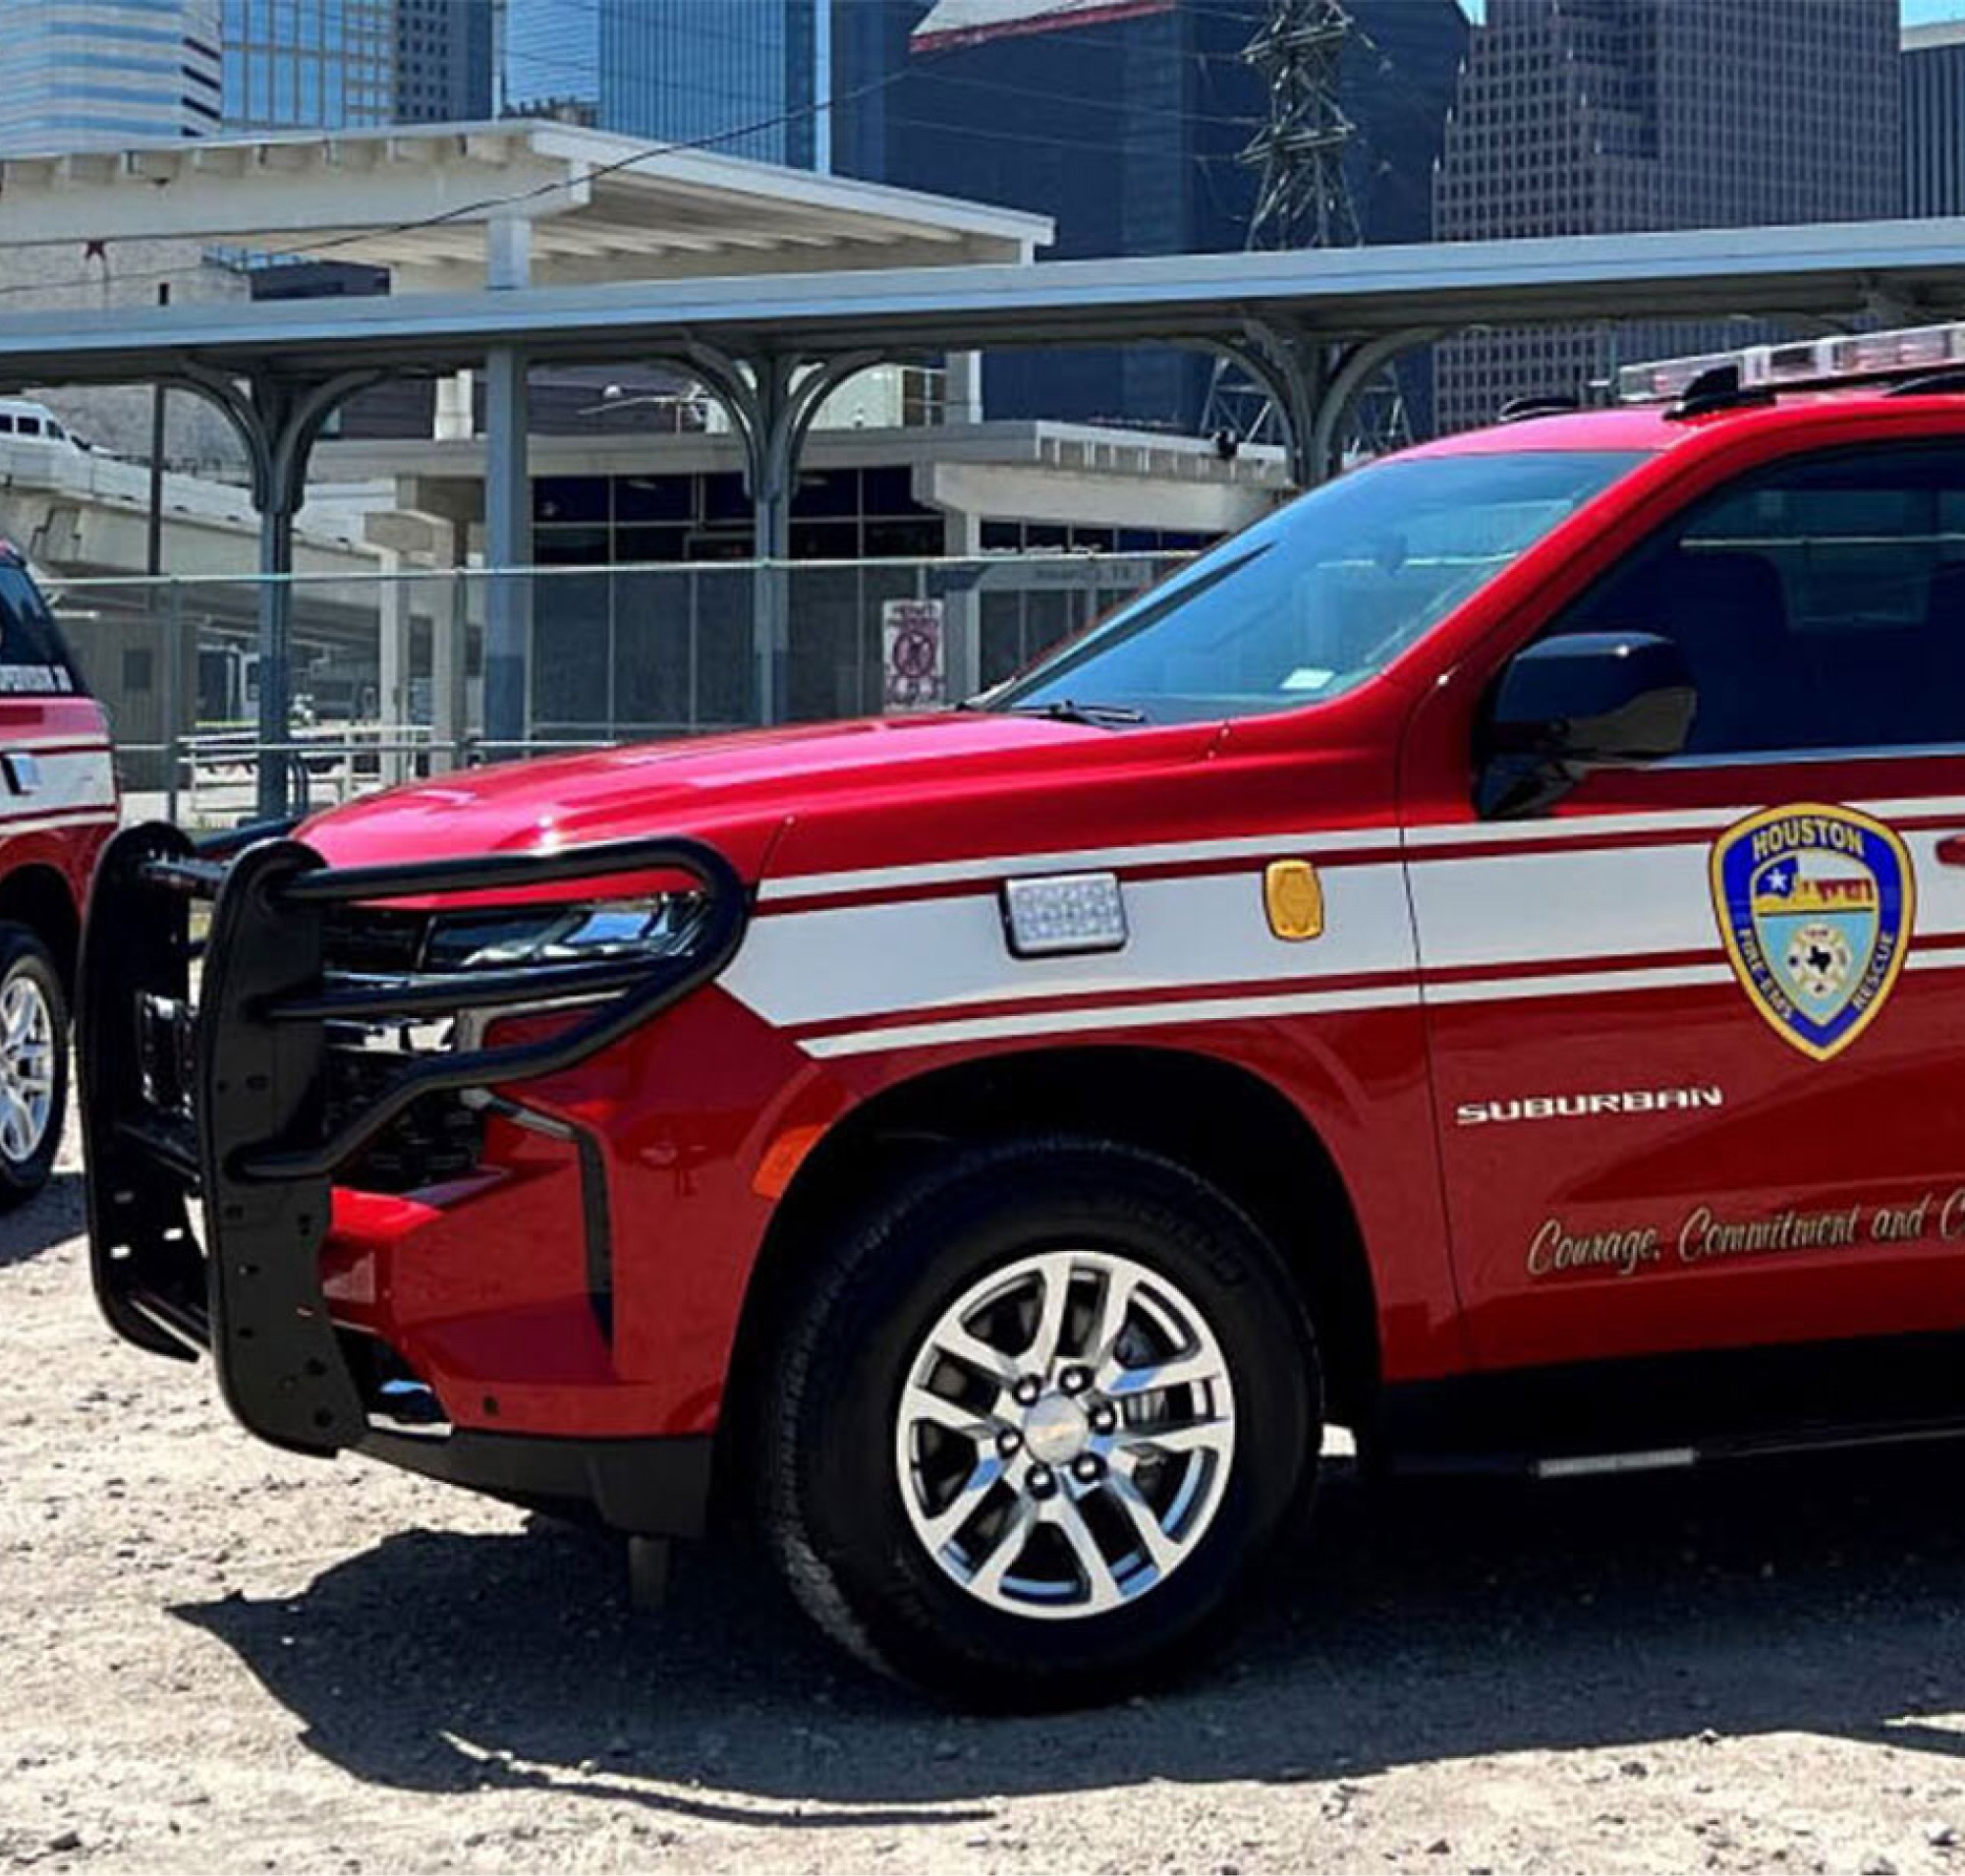 Red houston fire department suv parked outdoors with city buildings in the background.